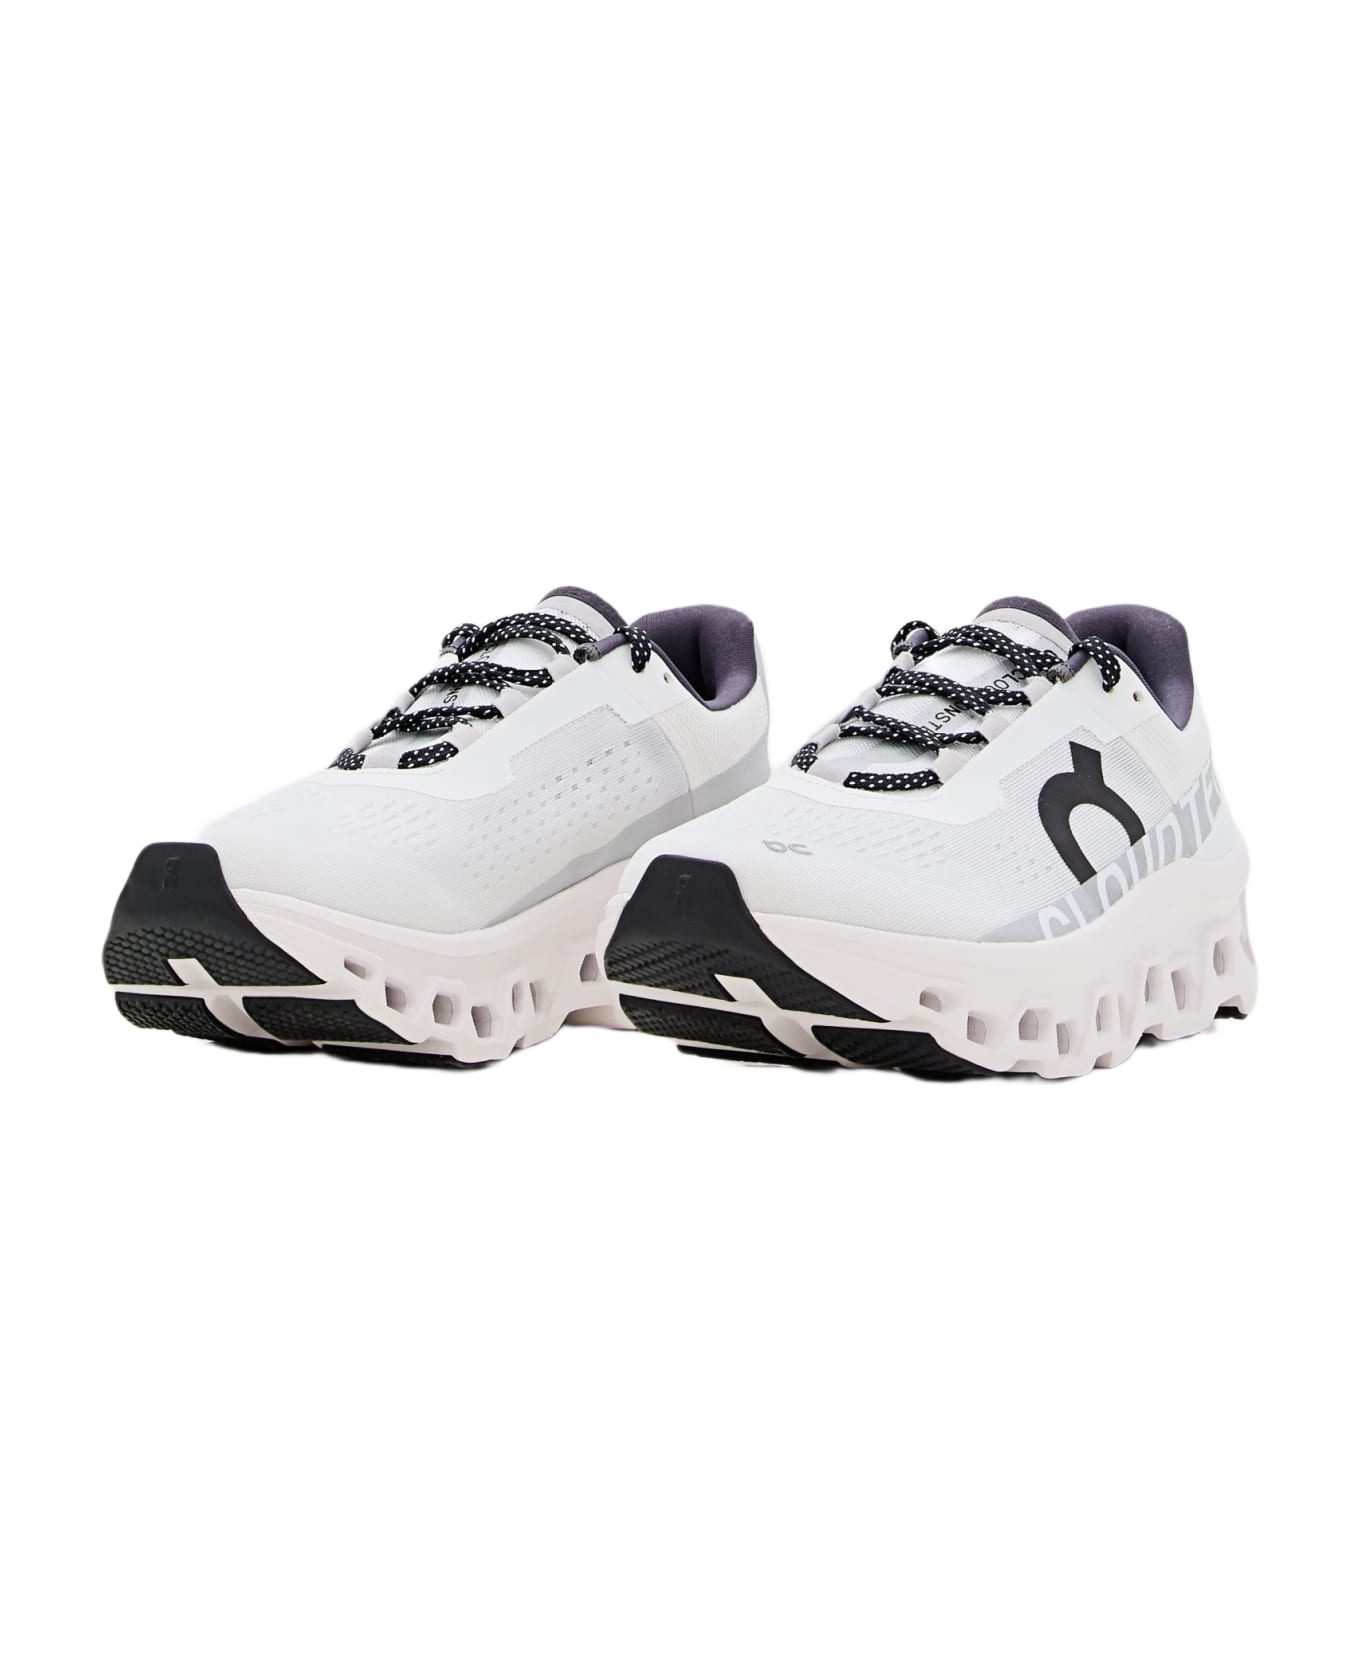 ON Cloudmonster Sneakers - White